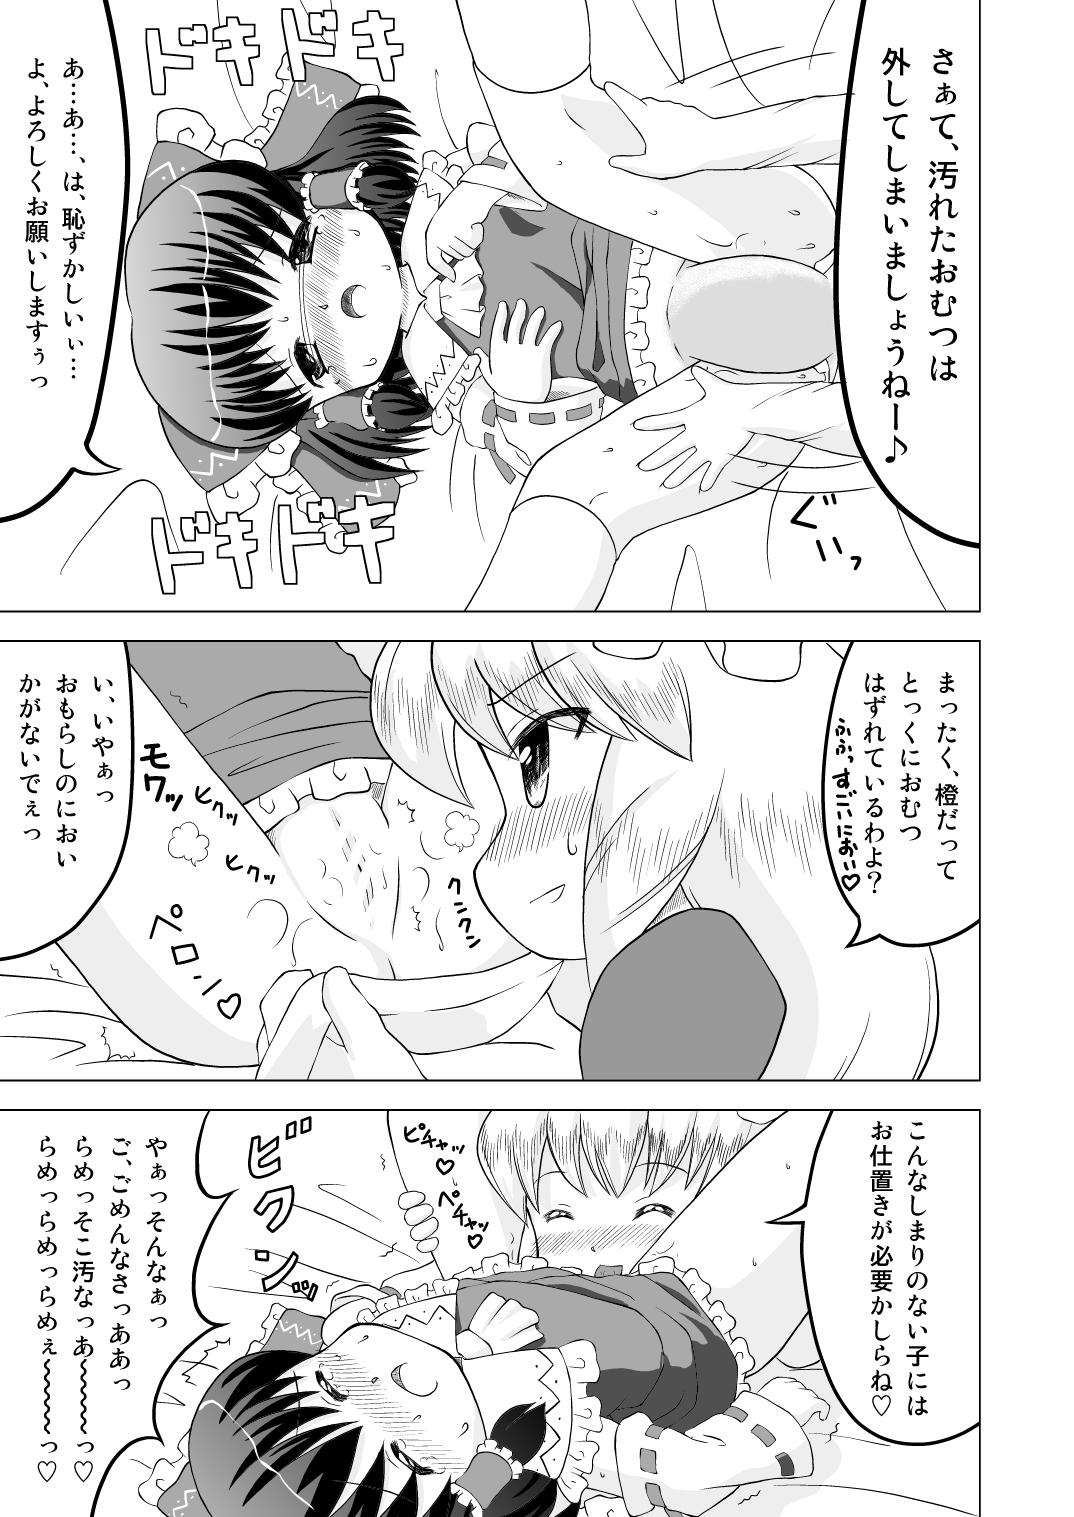 Titten 博麗霊夢お漏らし調教！ - Touhou project Gay Boy Porn - Page 7